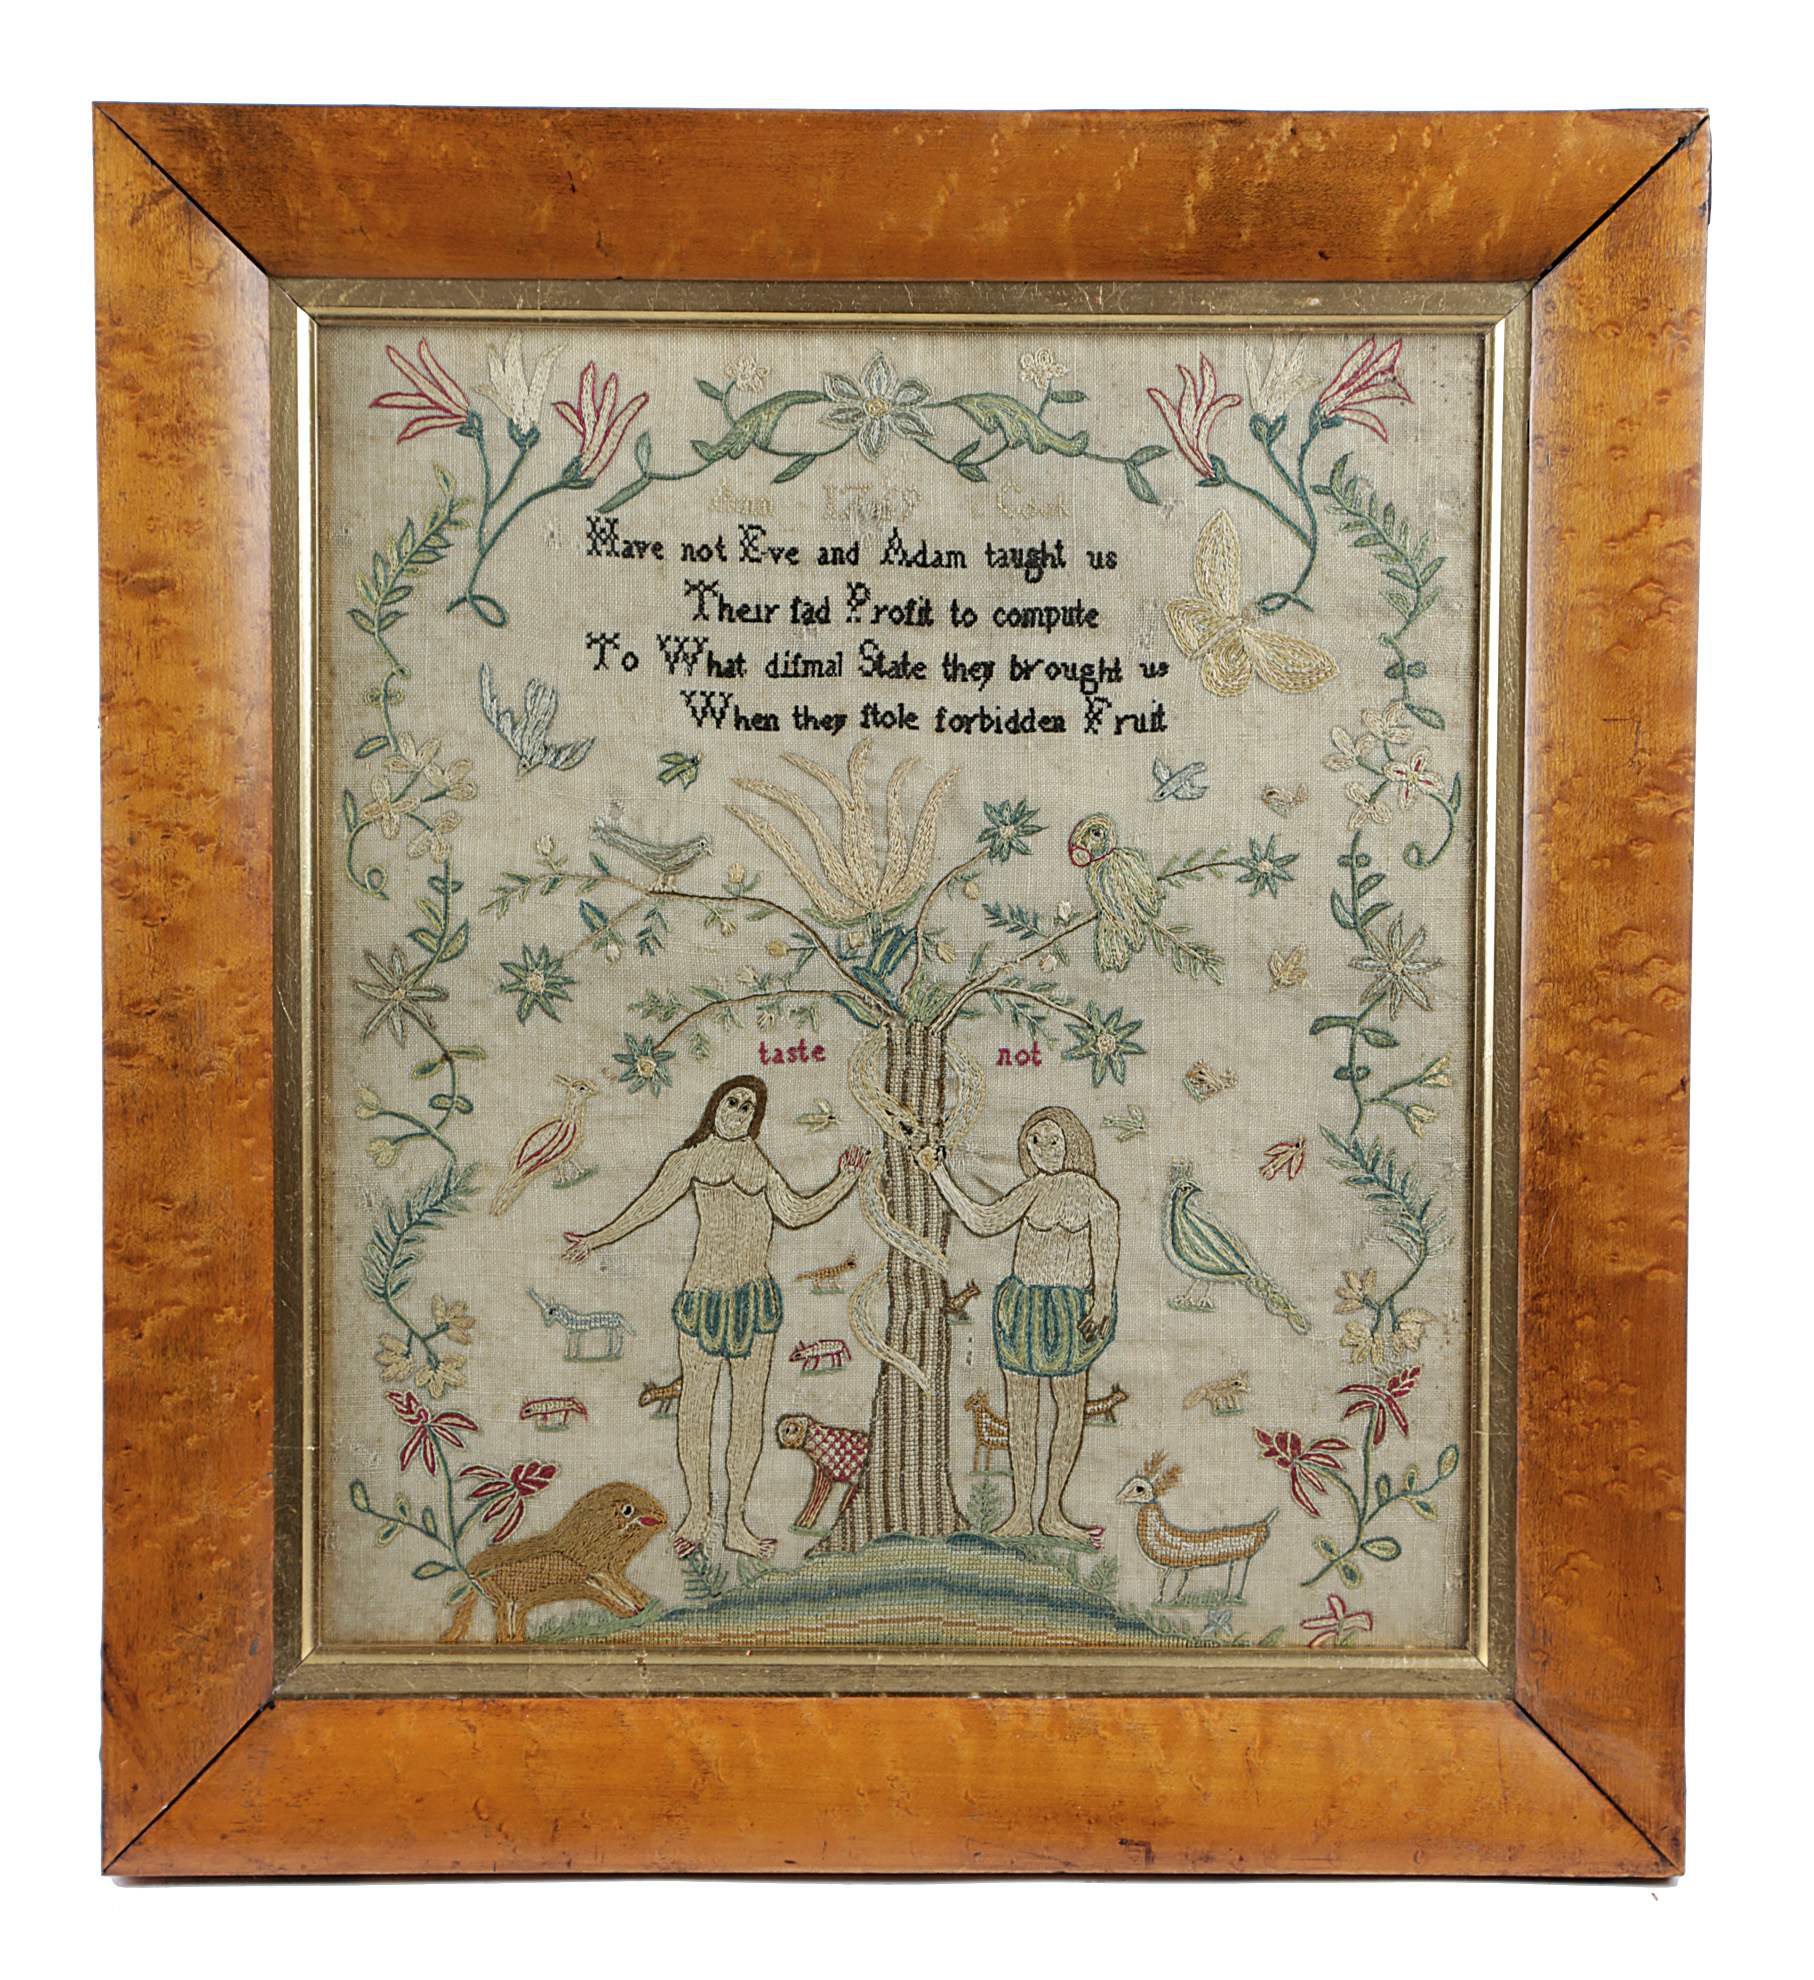 A GEORGE III NEEDLEWORK ADAM AND EVE SAMPLER BY ANN COOK worked with polychrome silks on a linen